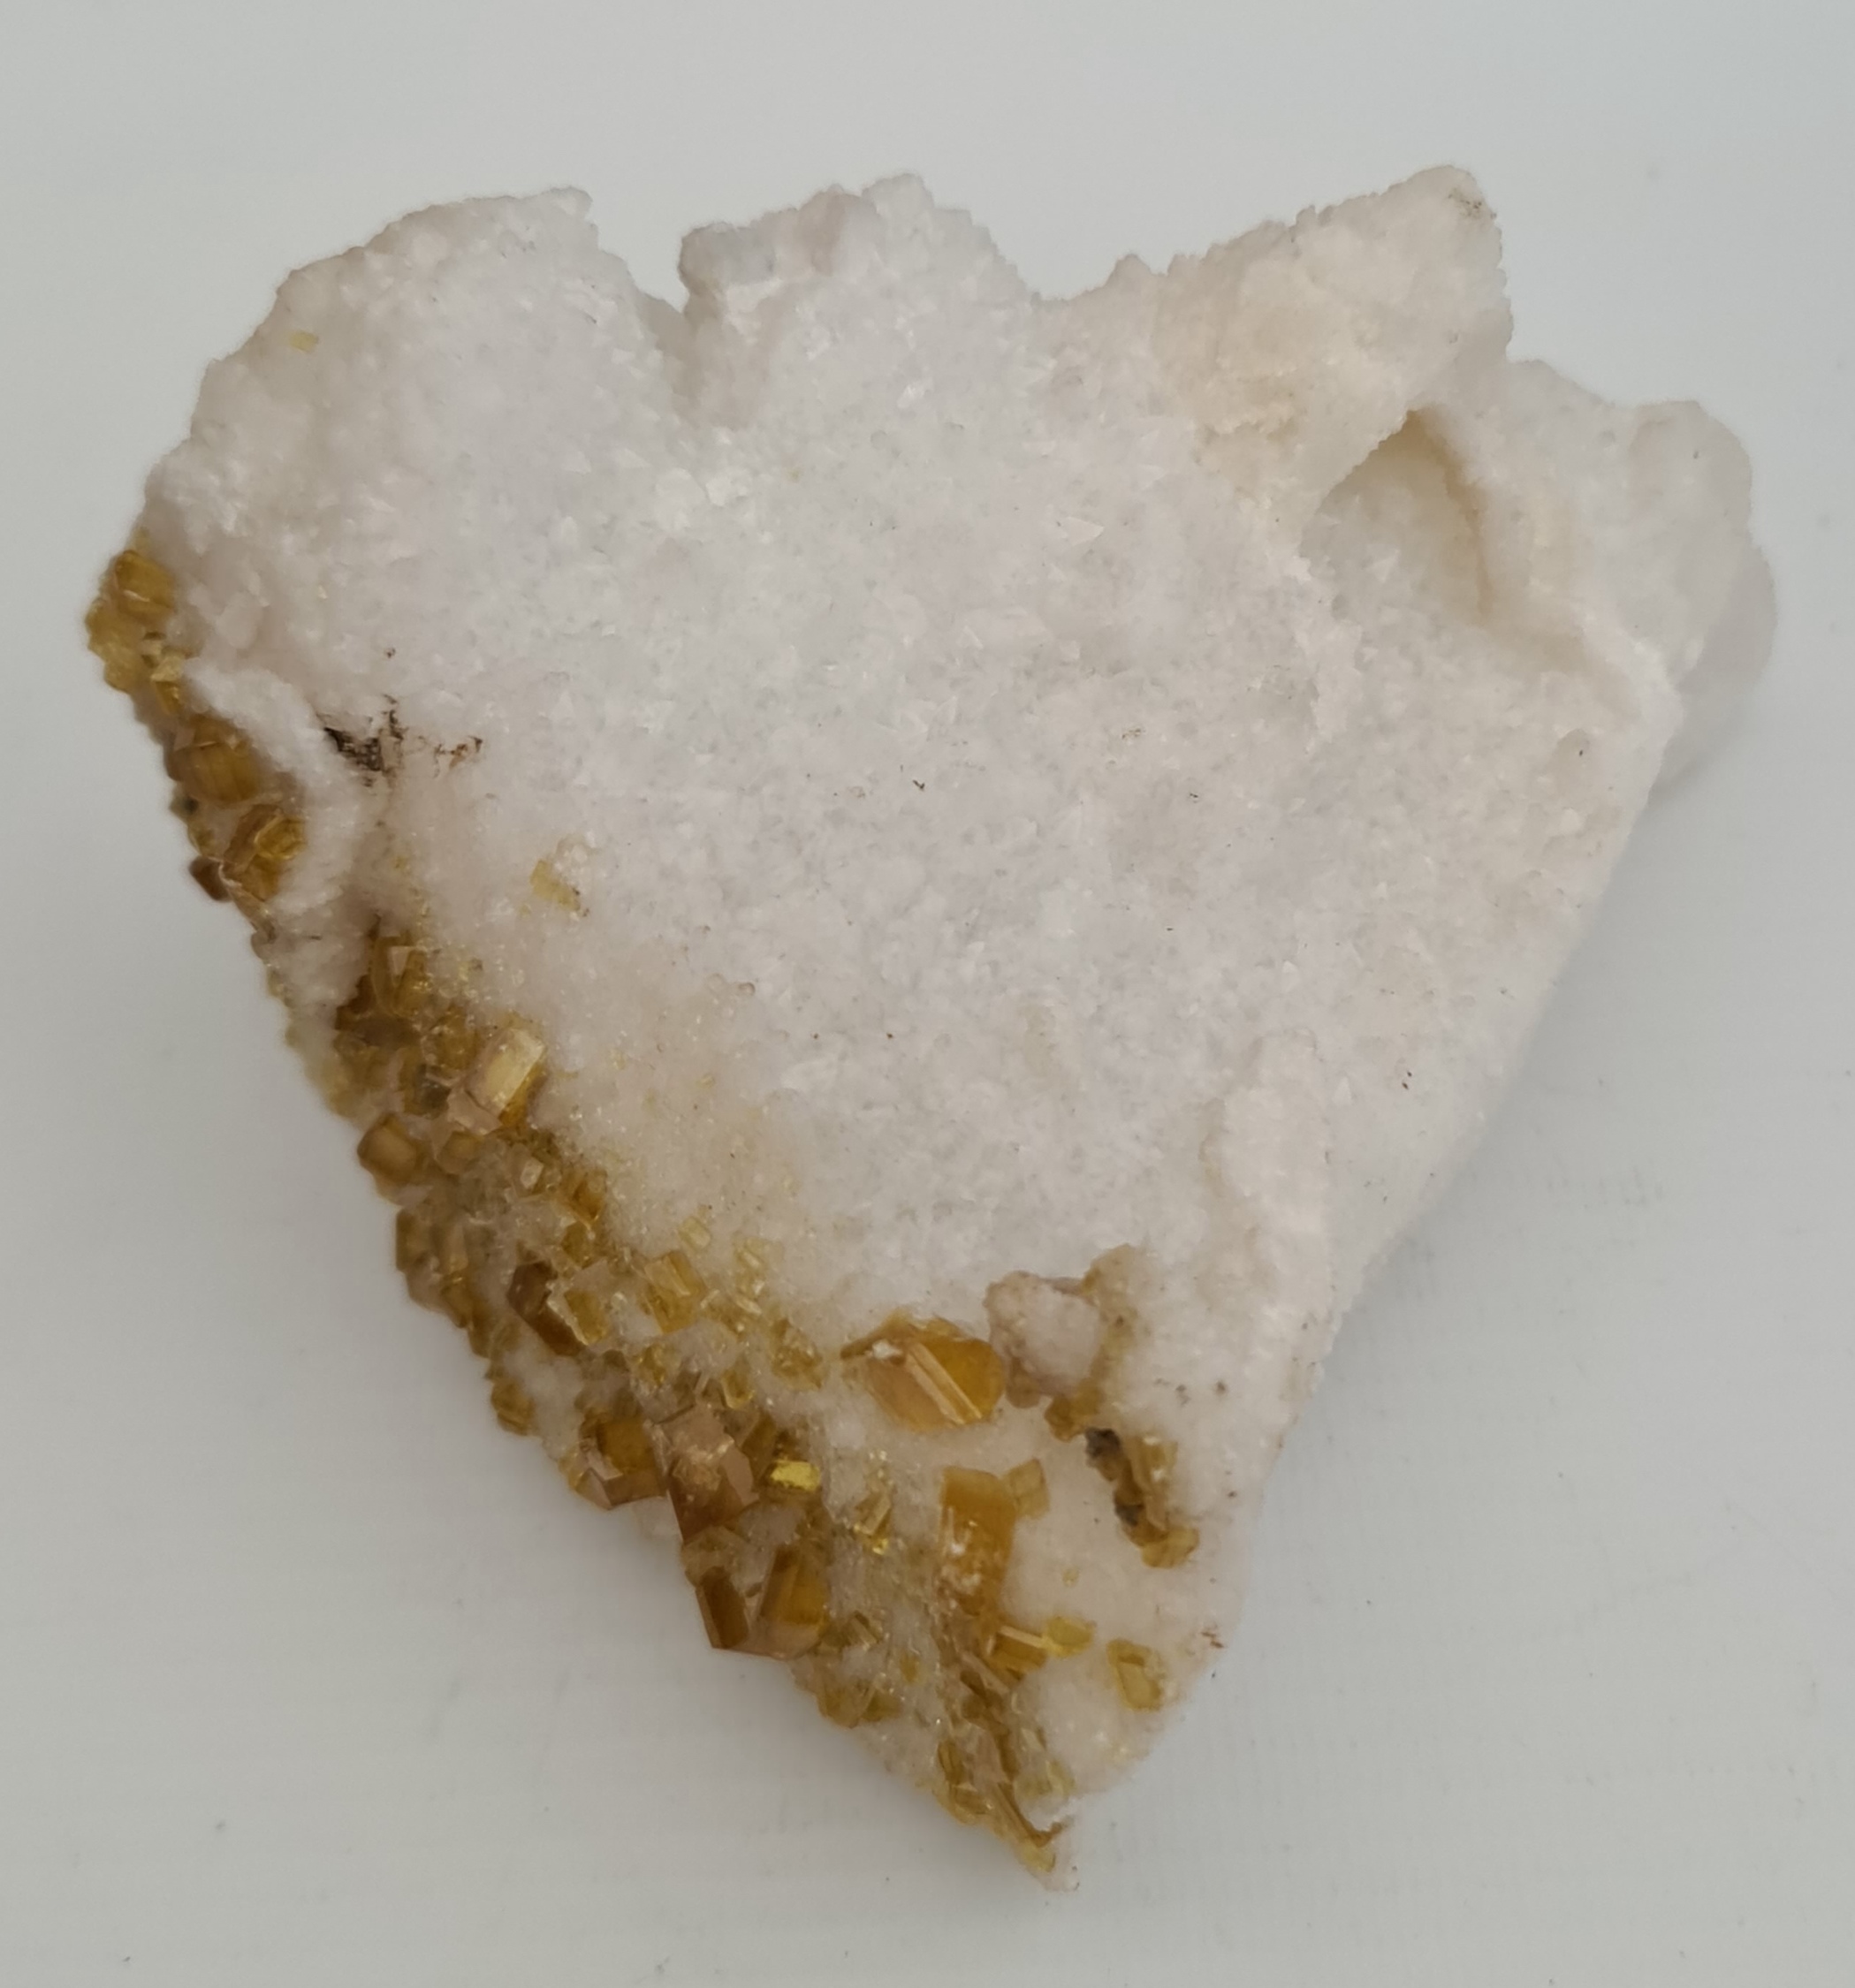 Collectable Rocks and Minerals Yellow Barite Crystals - Image 2 of 2